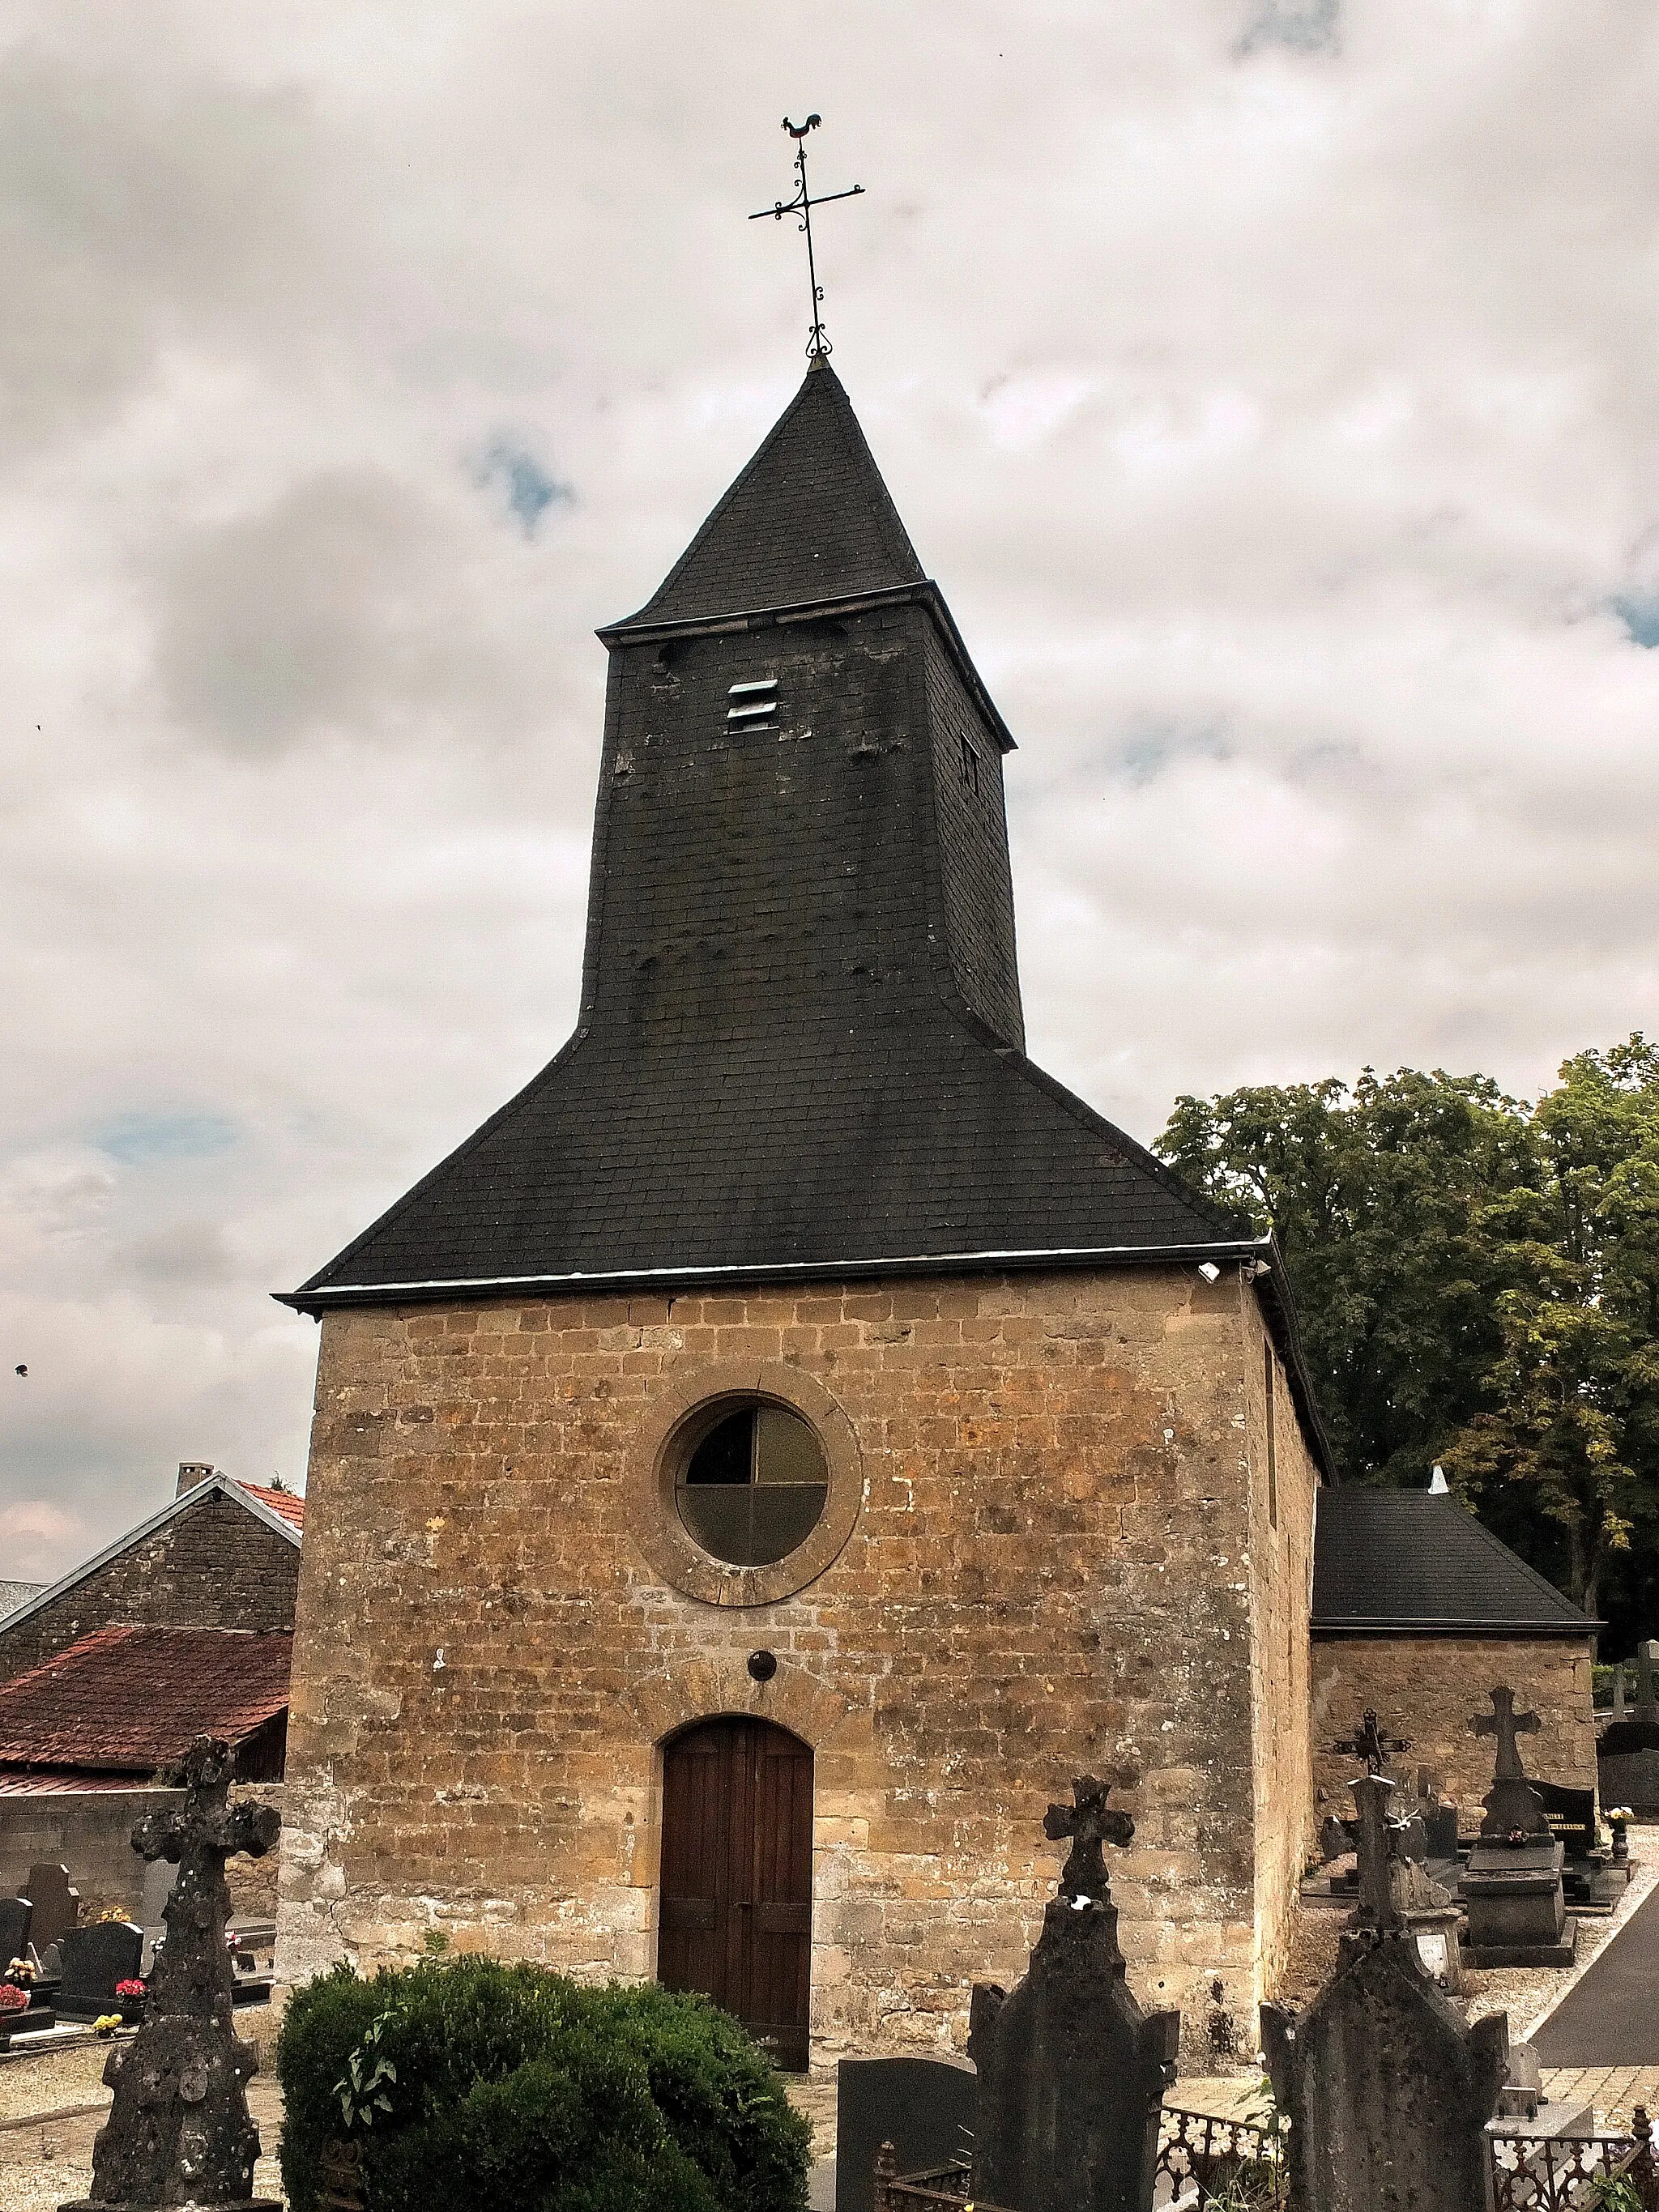 Photo showing: Étrépigny -Saint-Julien Church. This building, whose structure could date back to the 13th century due to the narrow bays and consoles of the choir.  
From 1689 to 1729, the parish church of Étrepigny was occupied by an atheist priest, Father Jean Meslier, considered to be a precursor of the Lumières" see : https://en.wikipedia.org/wiki/Jean_Meslier